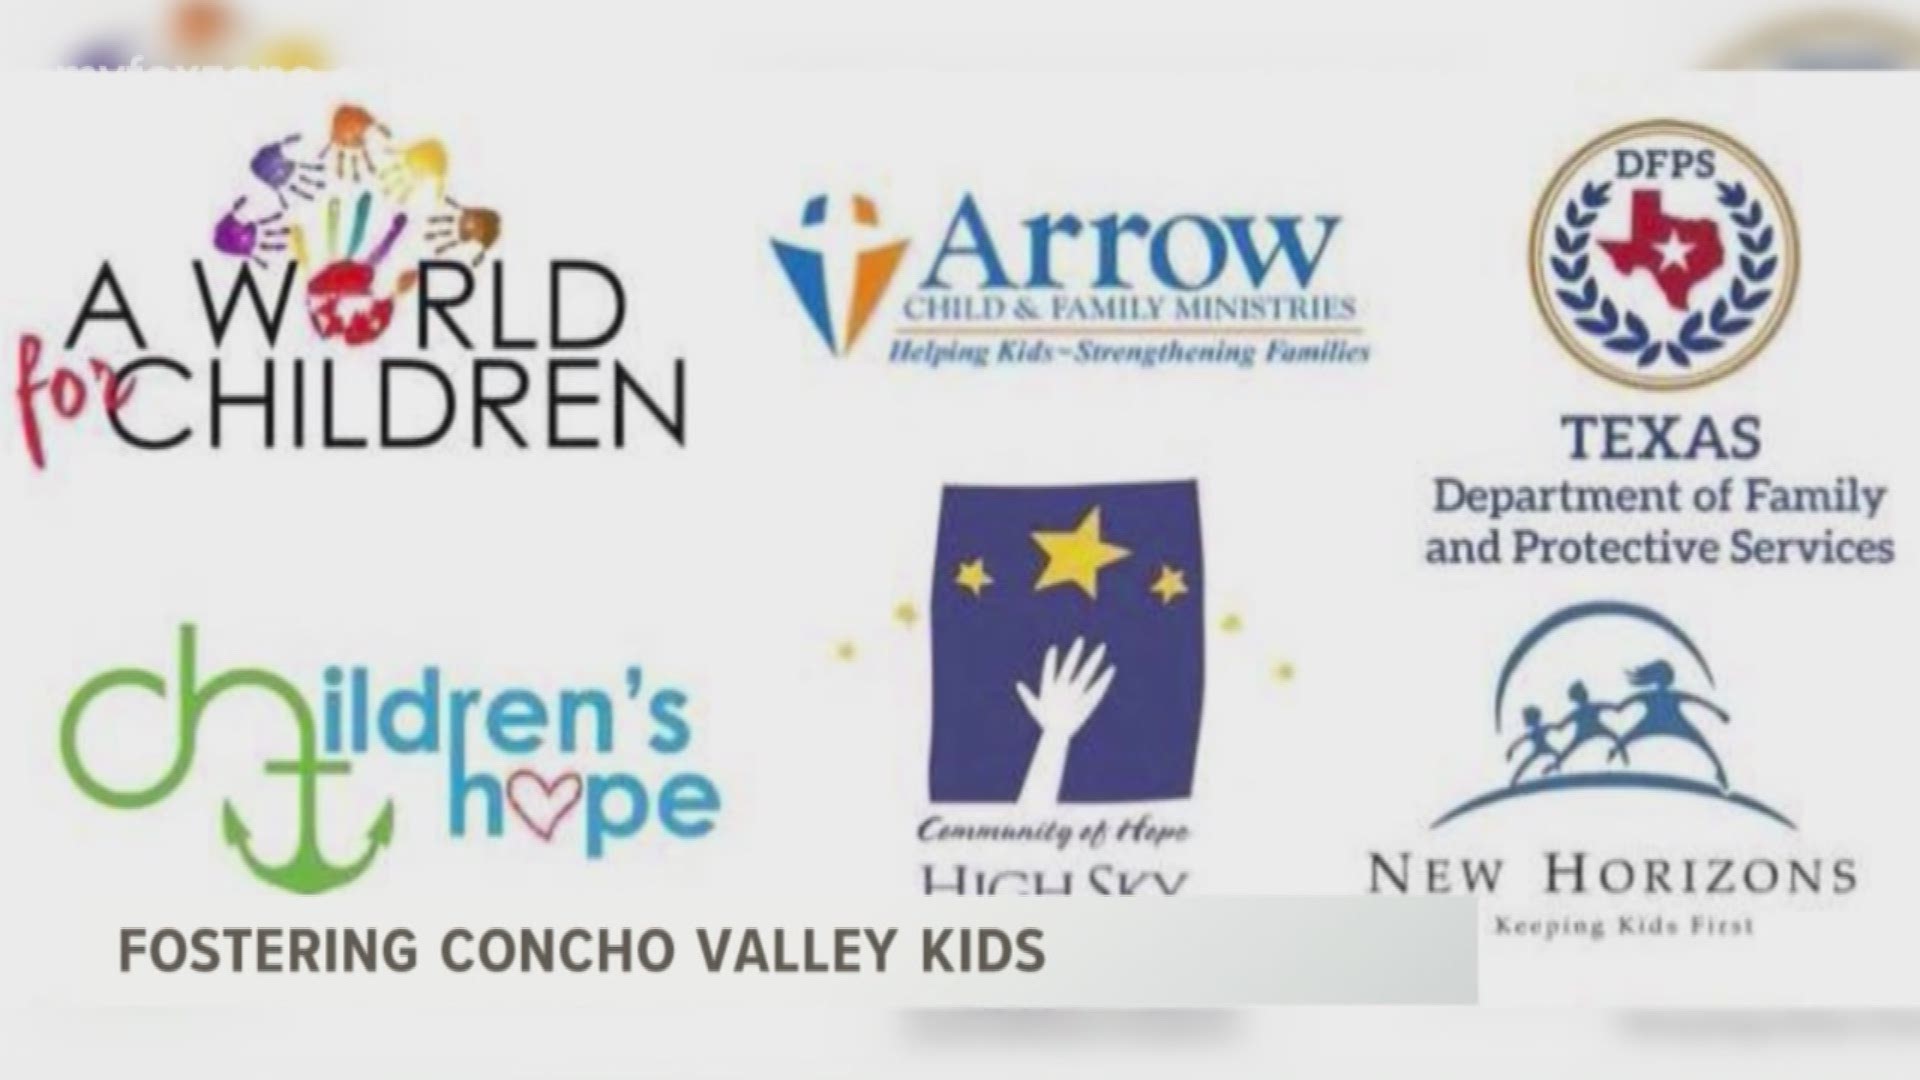 Answering the call to foster Concho Valley kids 